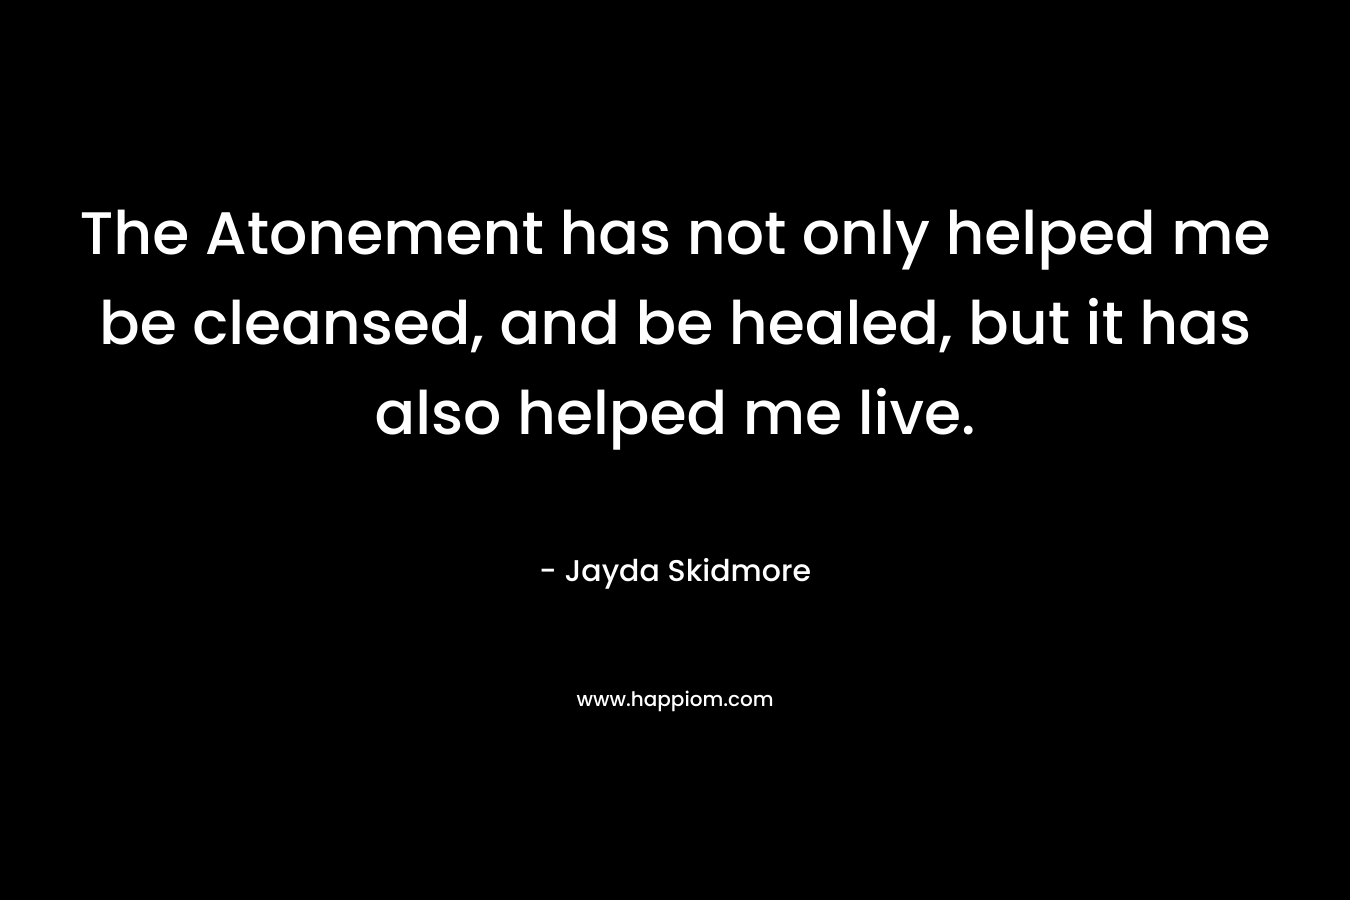 The Atonement has not only helped me be cleansed, and be healed, but it has also helped me live. – Jayda Skidmore